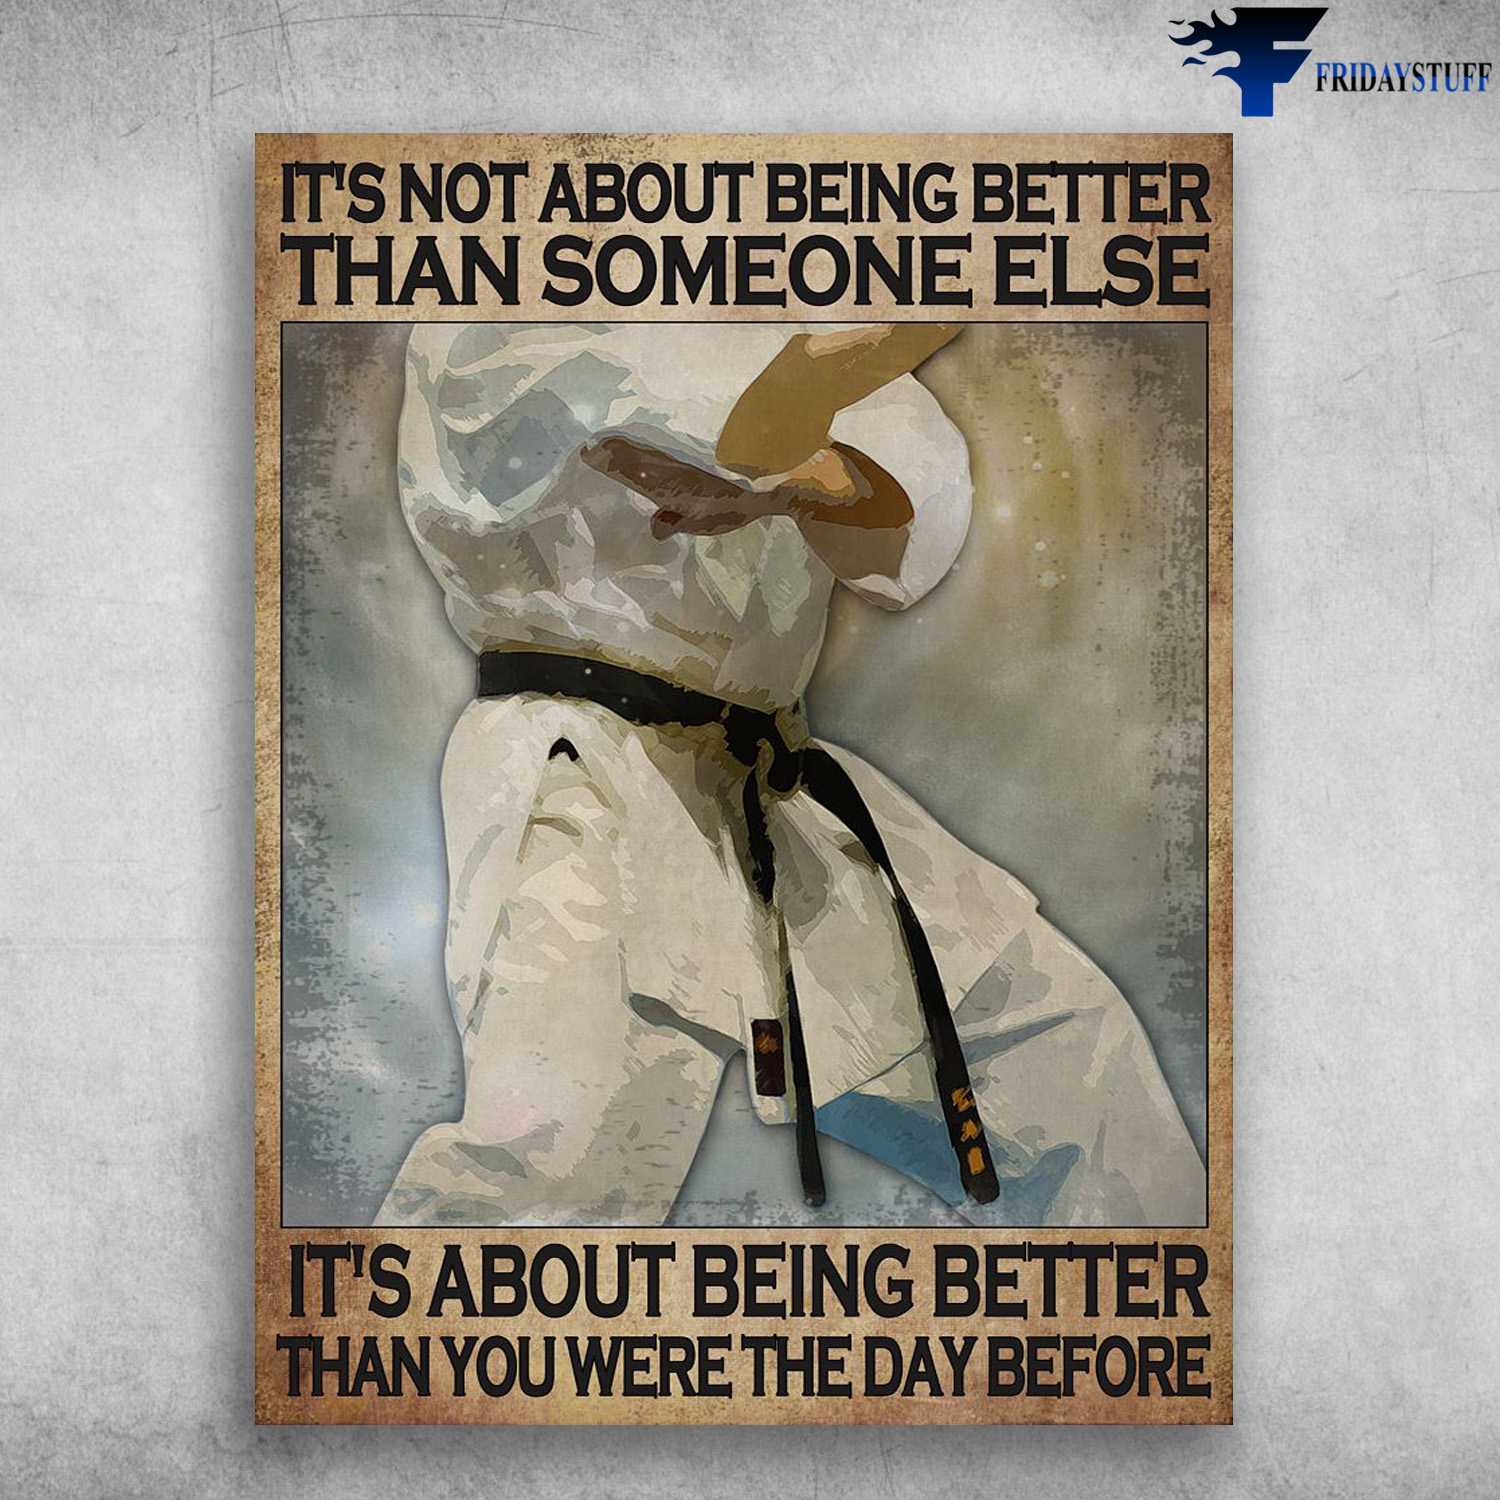 Karate Poster, Karate Man - It's Not About Being Better, Than Someone Else, It's About Being Better, Than You Were The Day Before